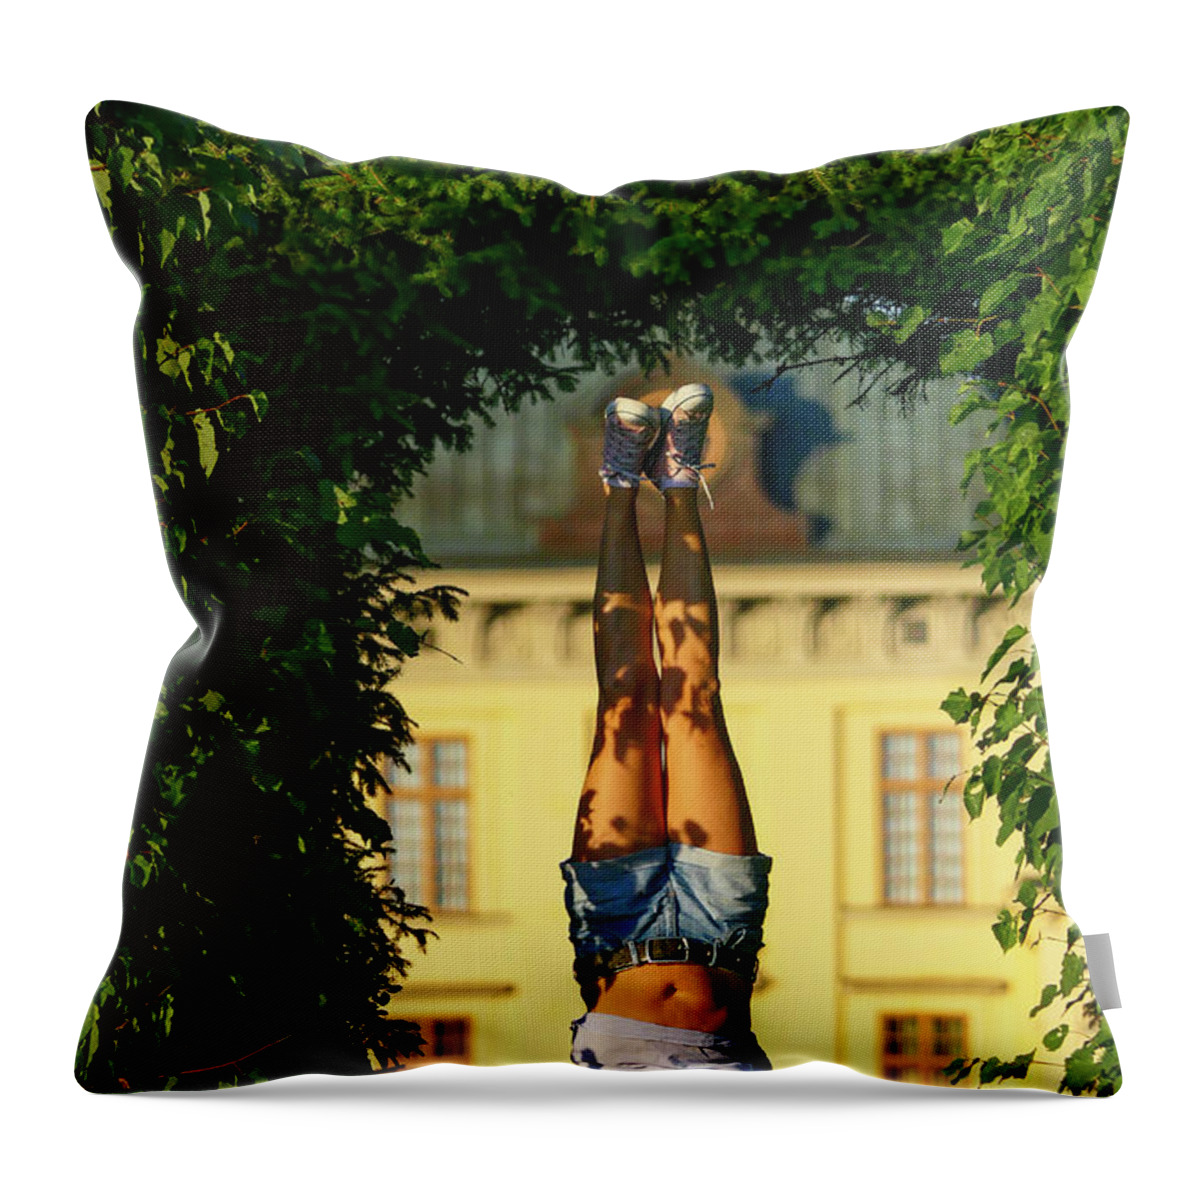 Europe Throw Pillow featuring the photograph Headstand by Alexander Farnsworth